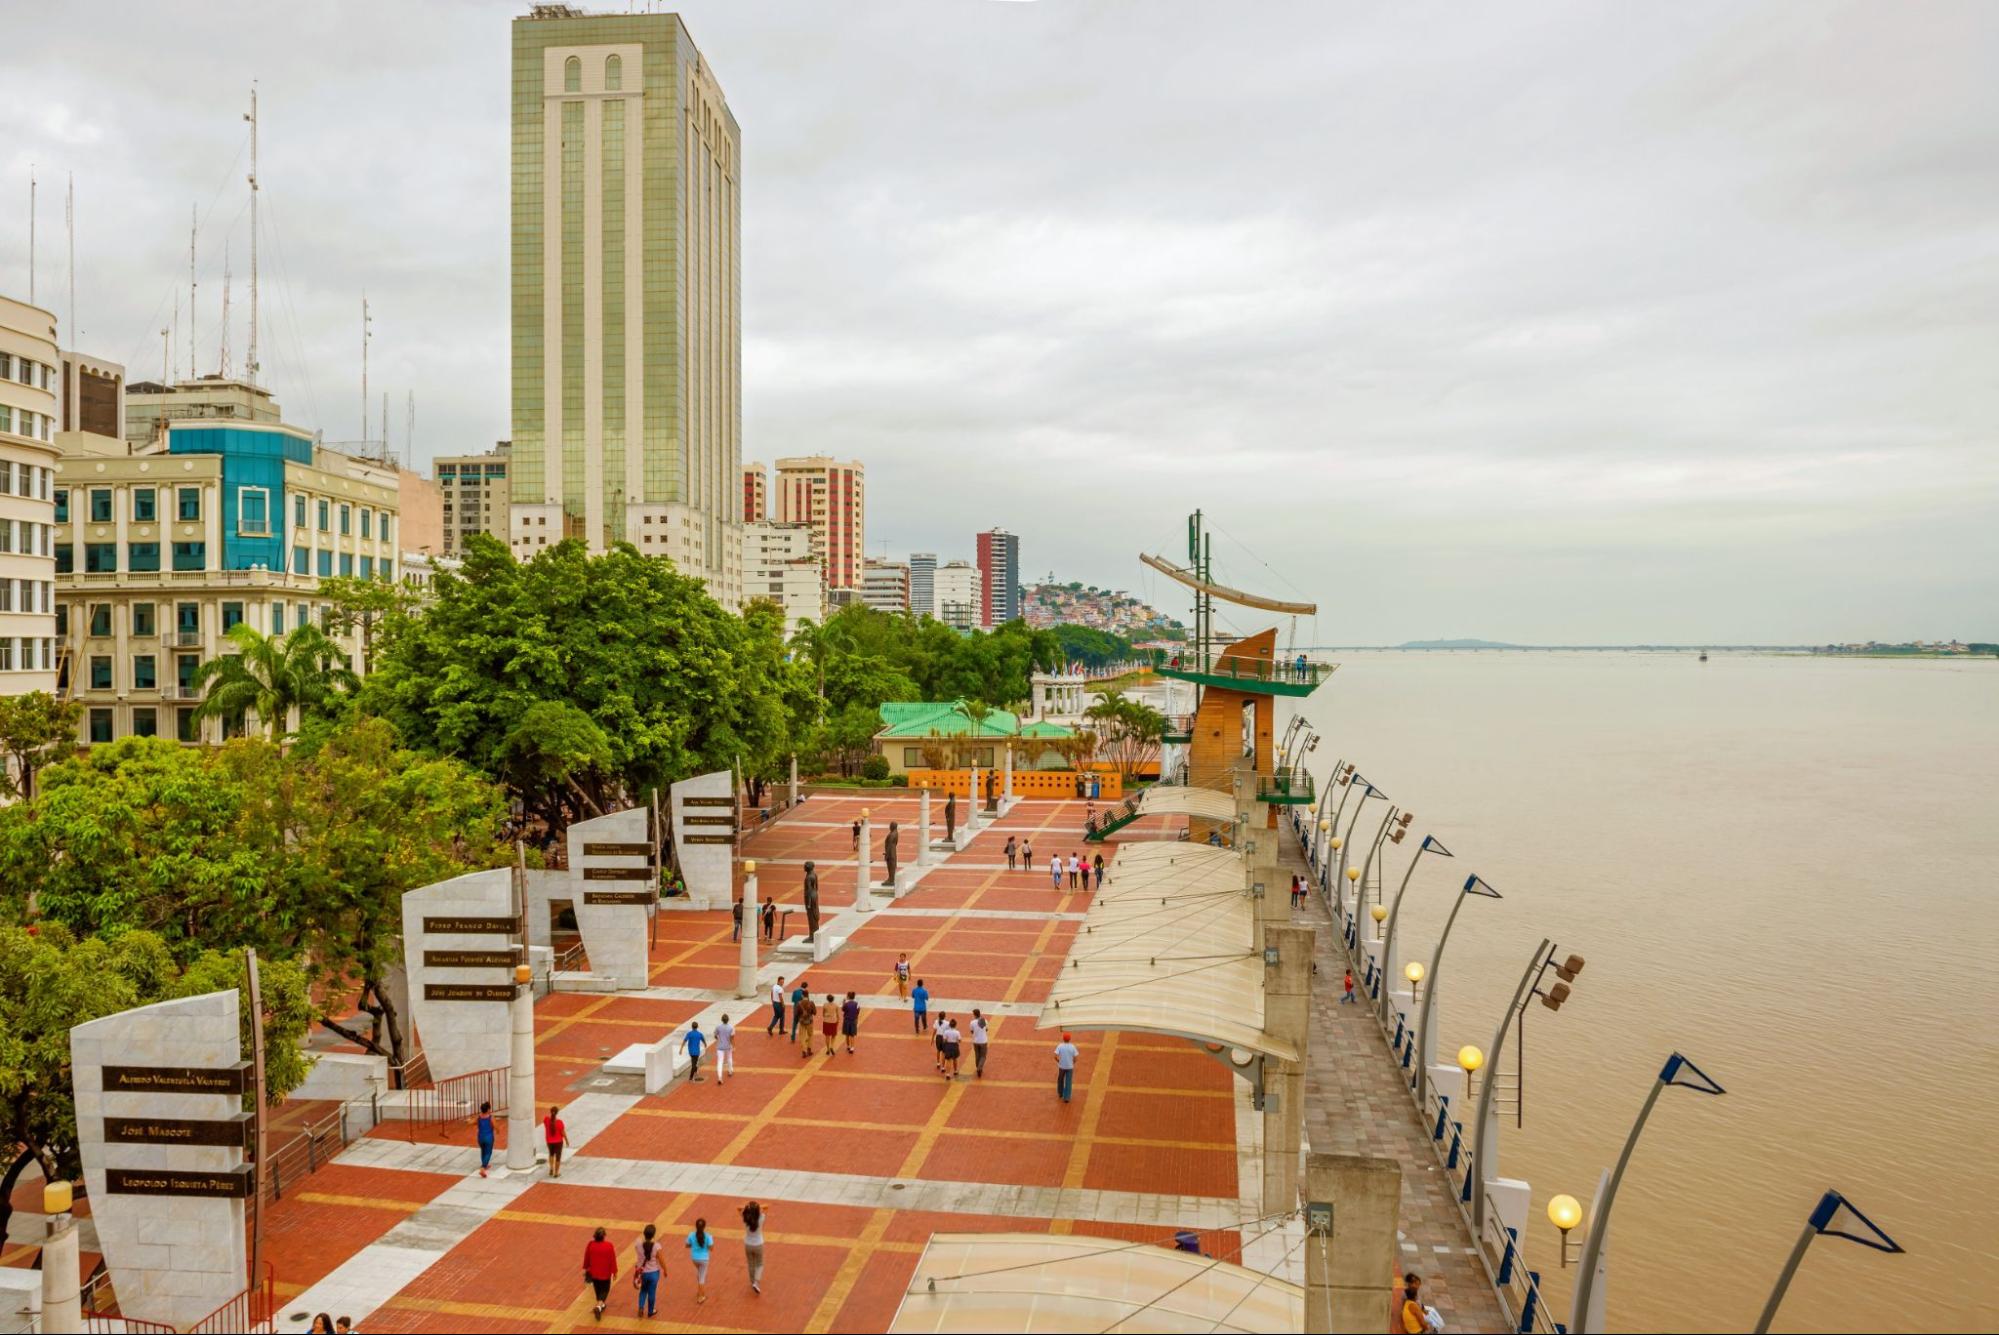 View at people walking at Malecon 2000. It is the name given to boardwalk overlooking the Guayas River in the Ecuadorian port city of Guayaquil